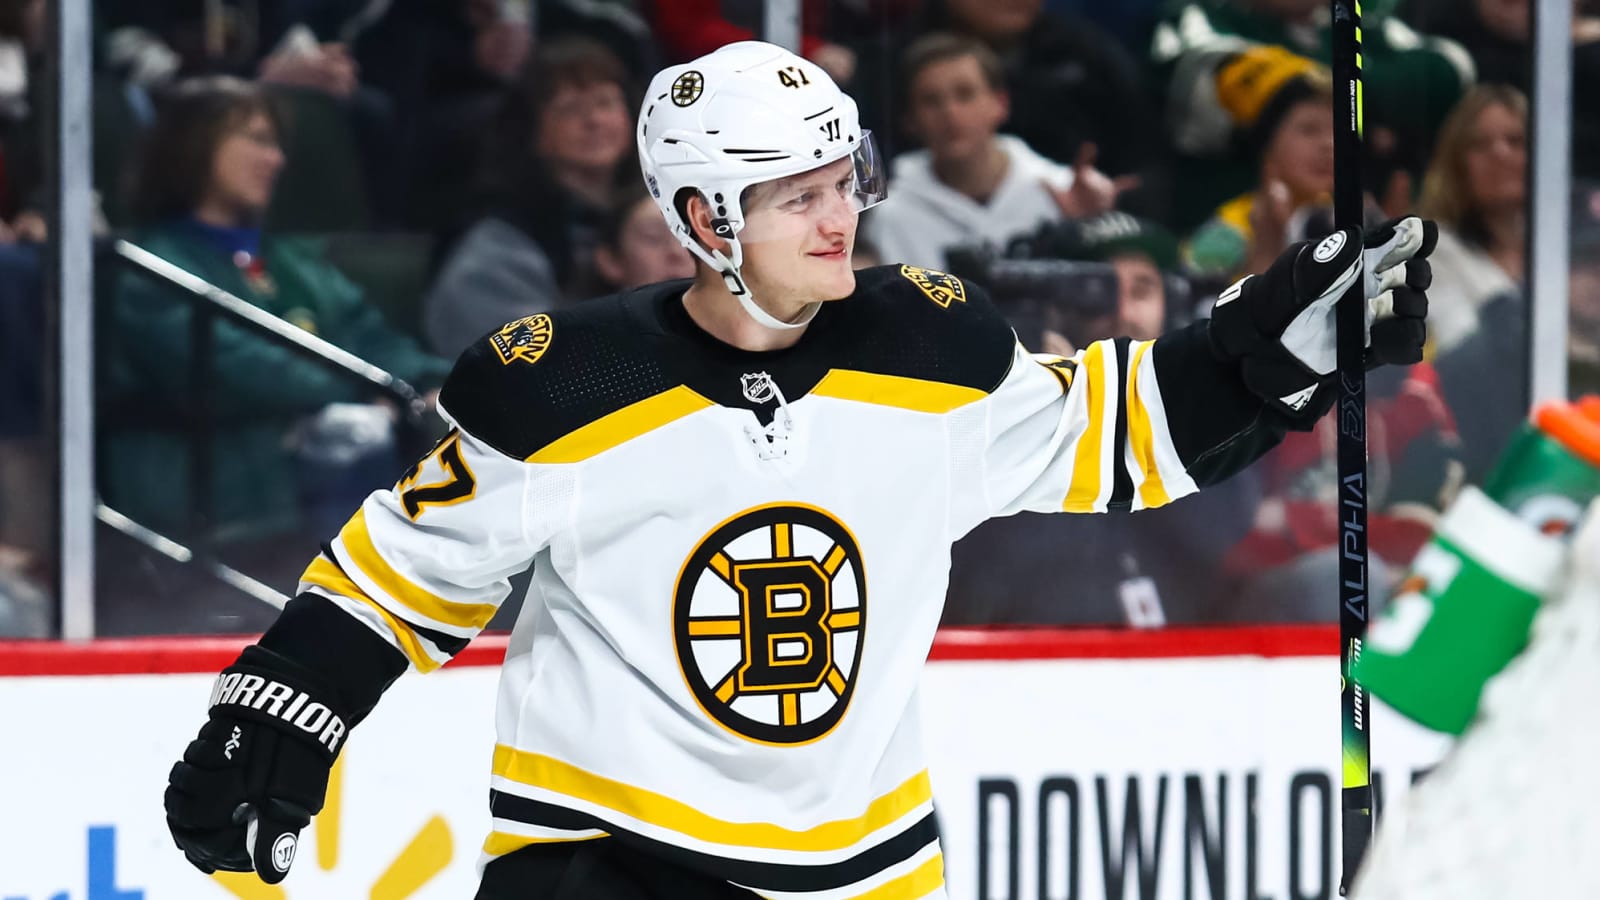 Ray Bourque wants Torey Krug to play entire career with Bruins